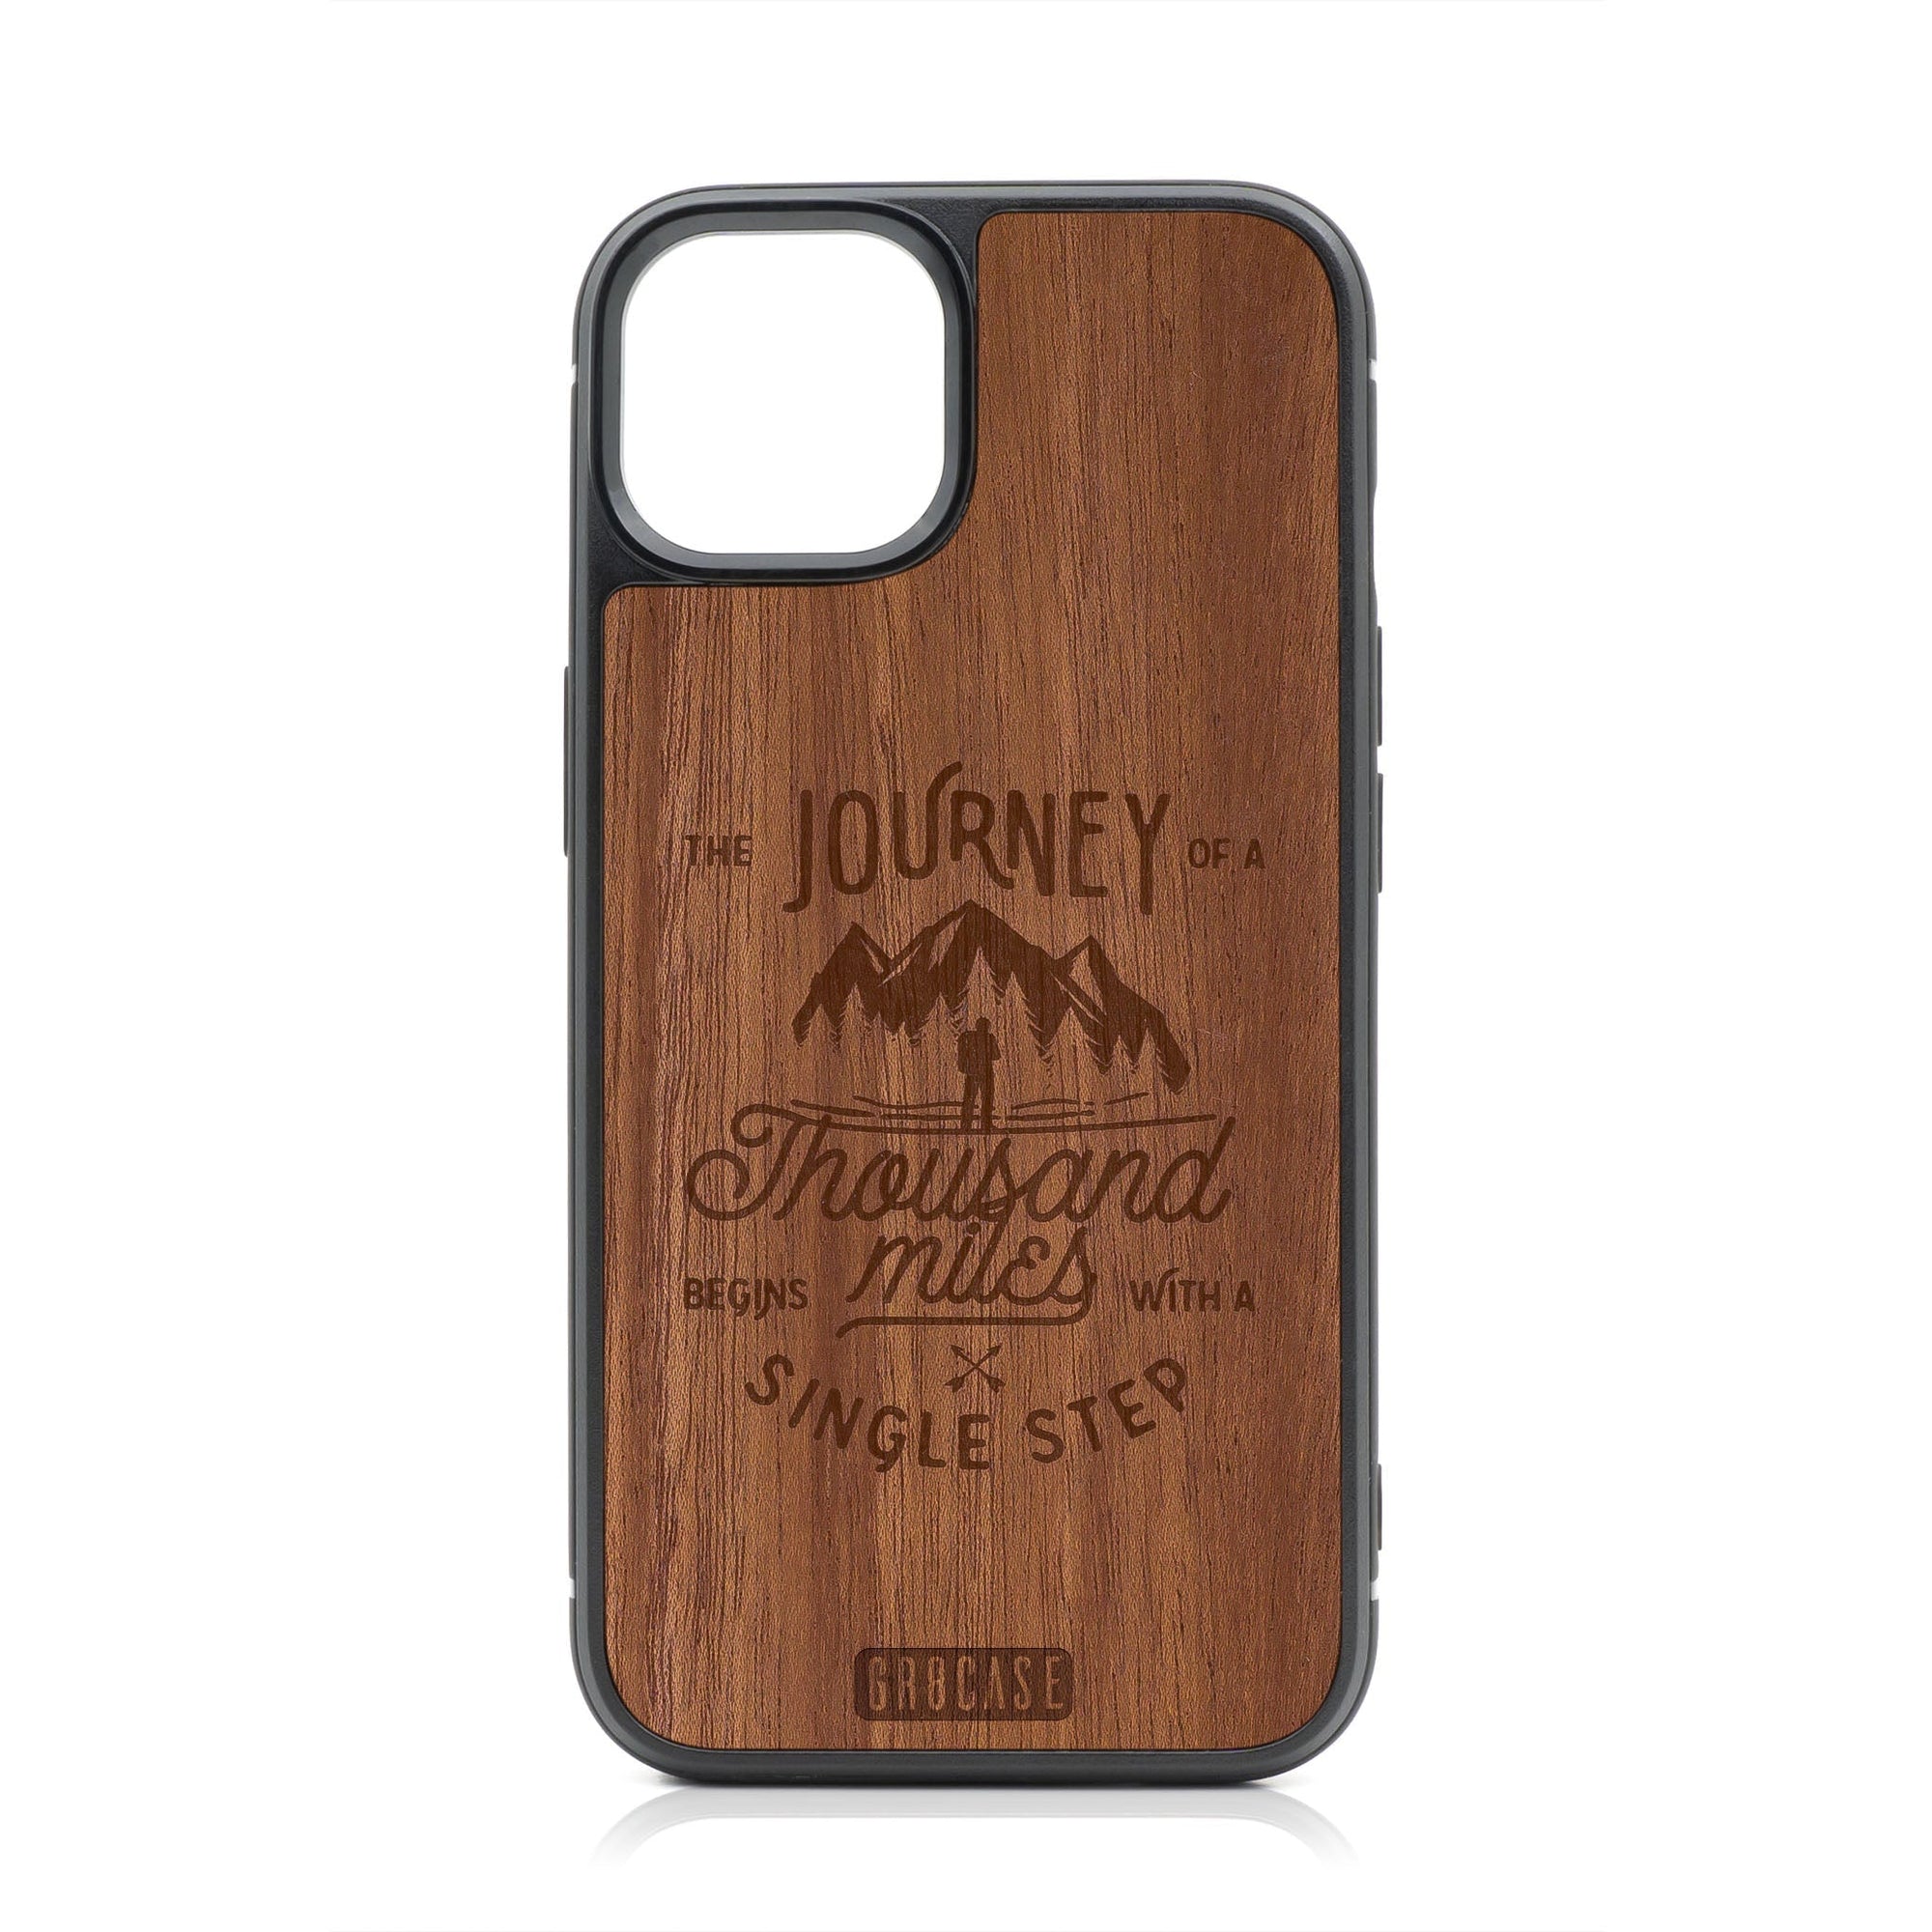 The Journey of A Thousand Miles Begins With A Single Step Design Wood Case For iPhone 15